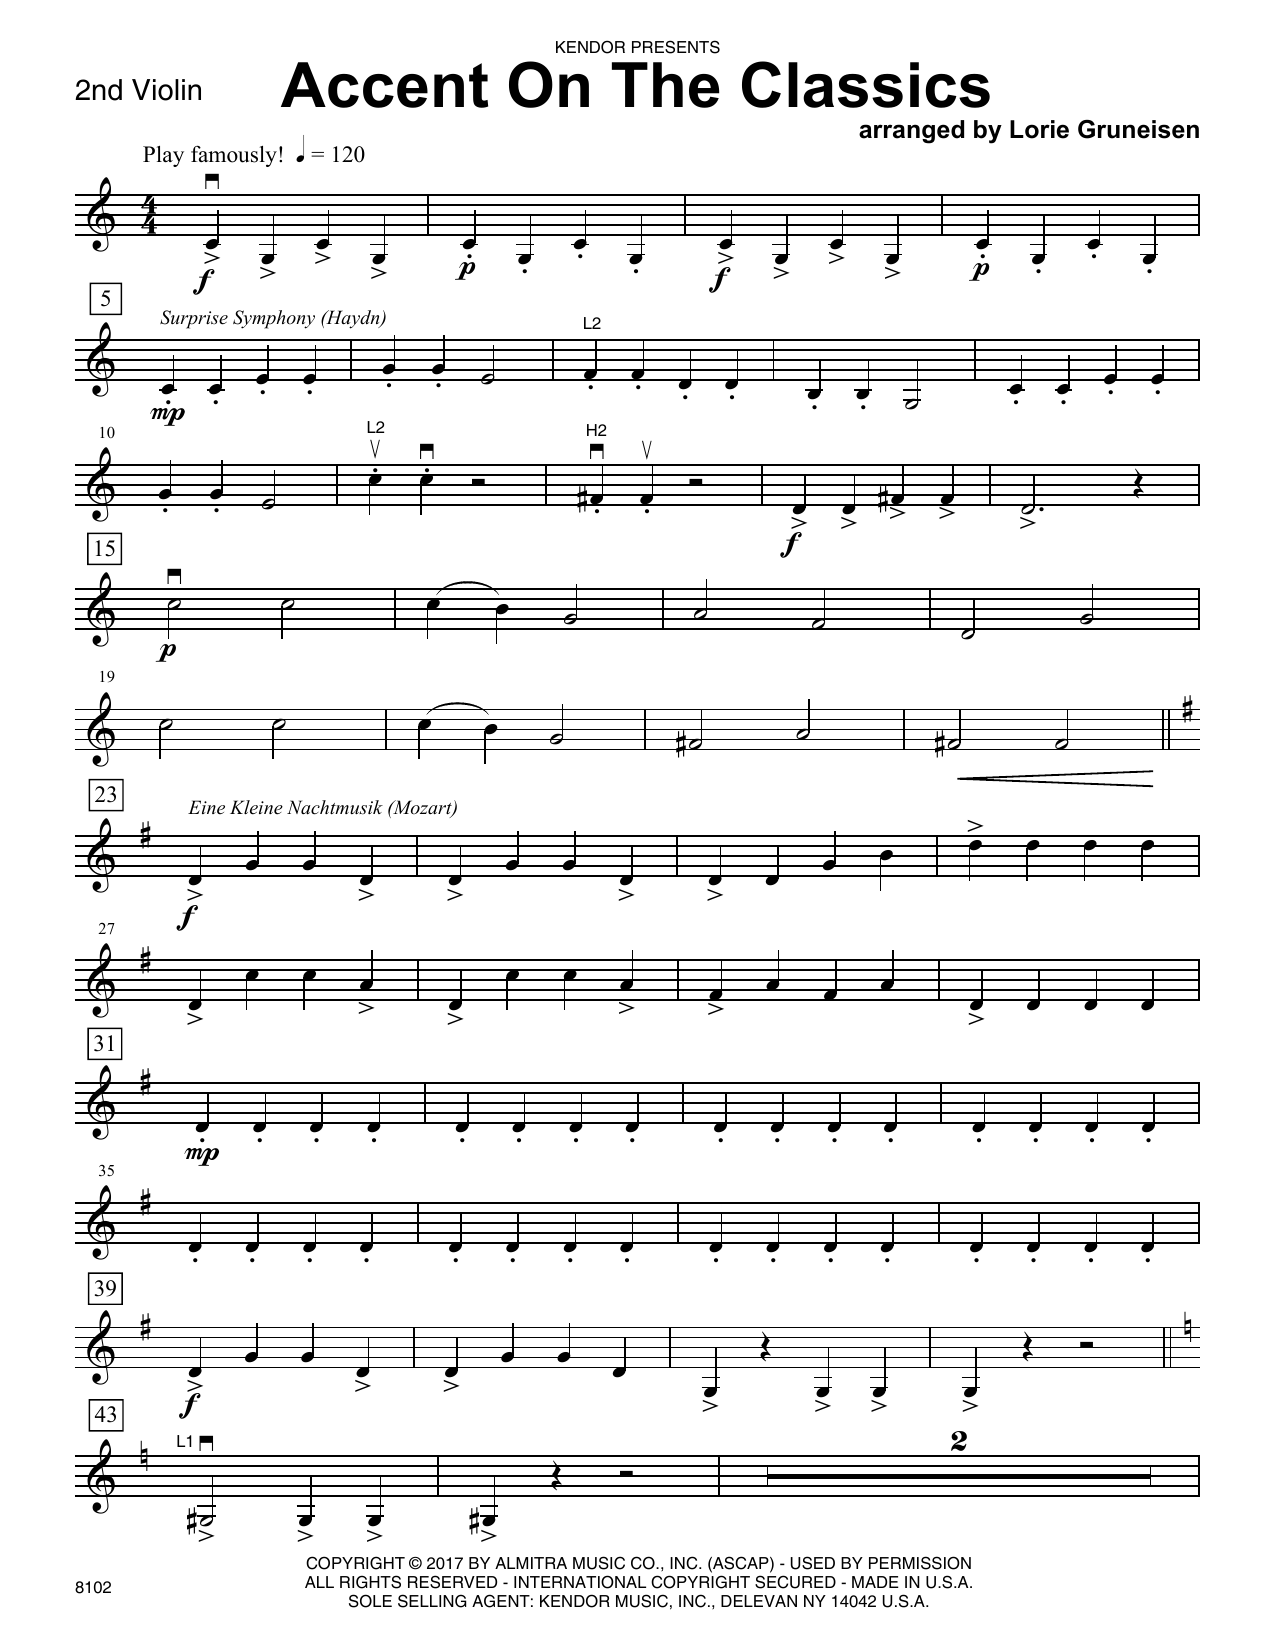 Download Lorie Gruneisen Accent On The Classics - 2nd Violin Sheet Music